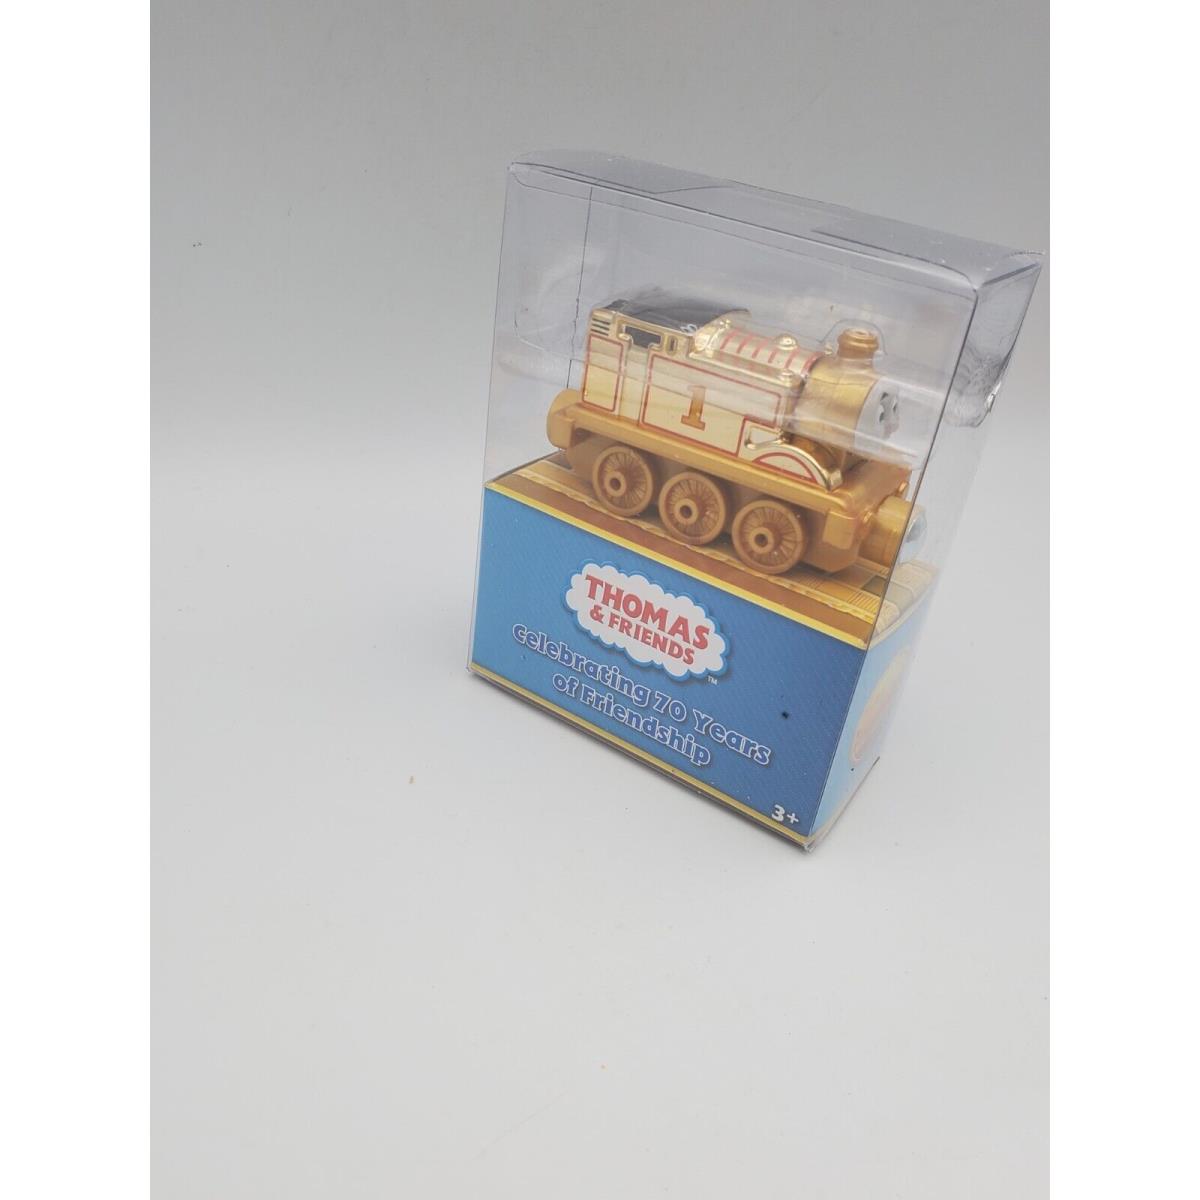 Thomas & Friends toy  - Gold